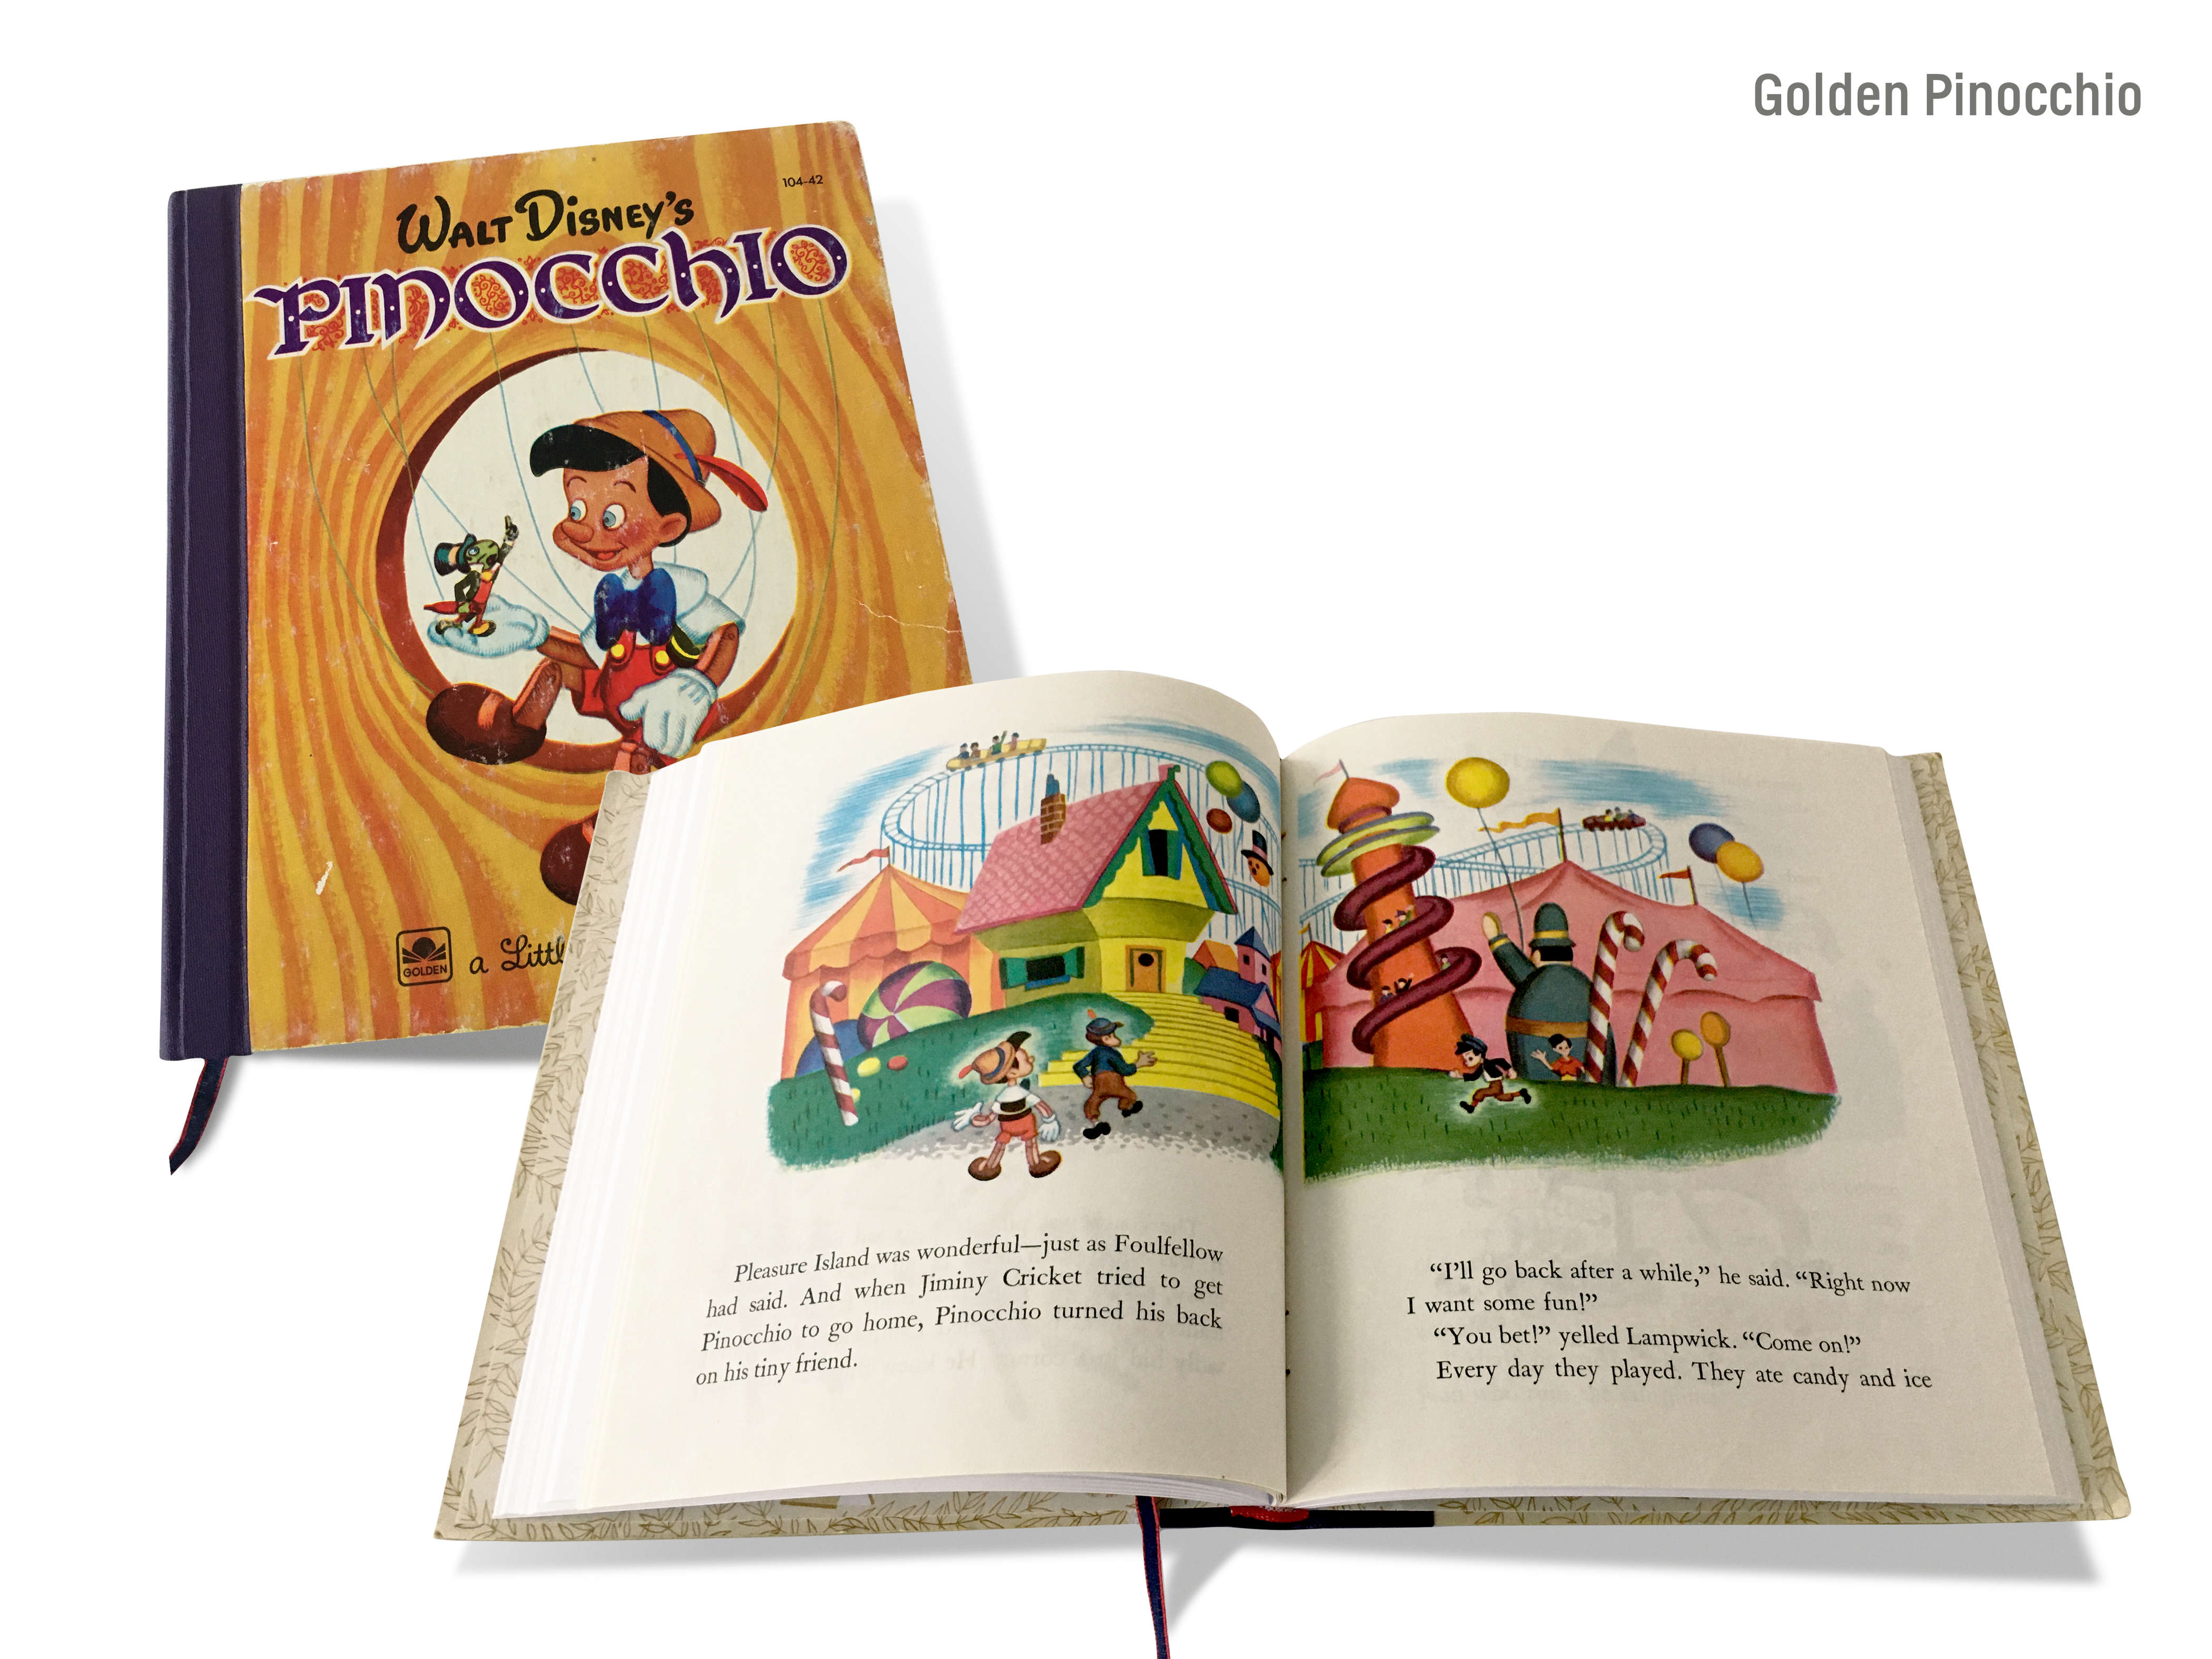 A montage image of a cover and a double-page spread of the hand-made journal titled, ‘Golden Pinocchio’ by Michael Small, featuring a Little Golden Book cover of ‘Walt Disney’s Pinocchio’ and a double-page spread showing drawings of Pinocchio at a funfair with roller-coaster rides, slippery dips, giant candy canes and balloons.